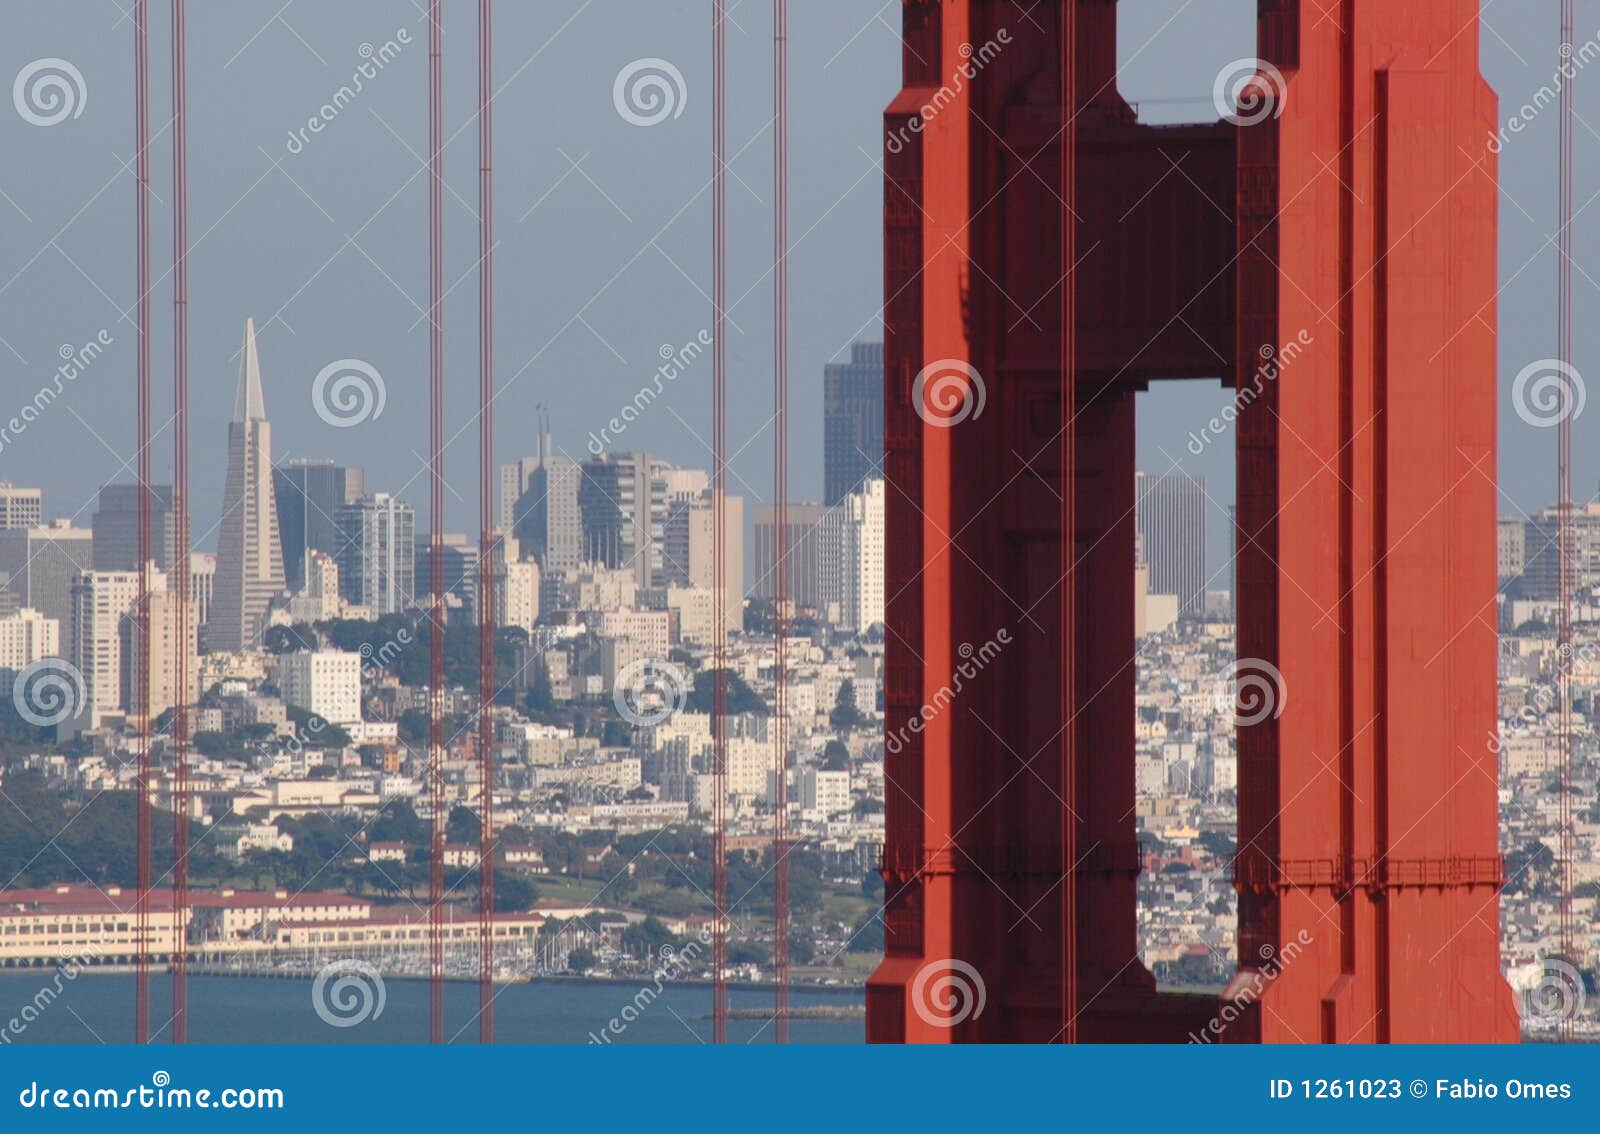 golden gate and san francisco.